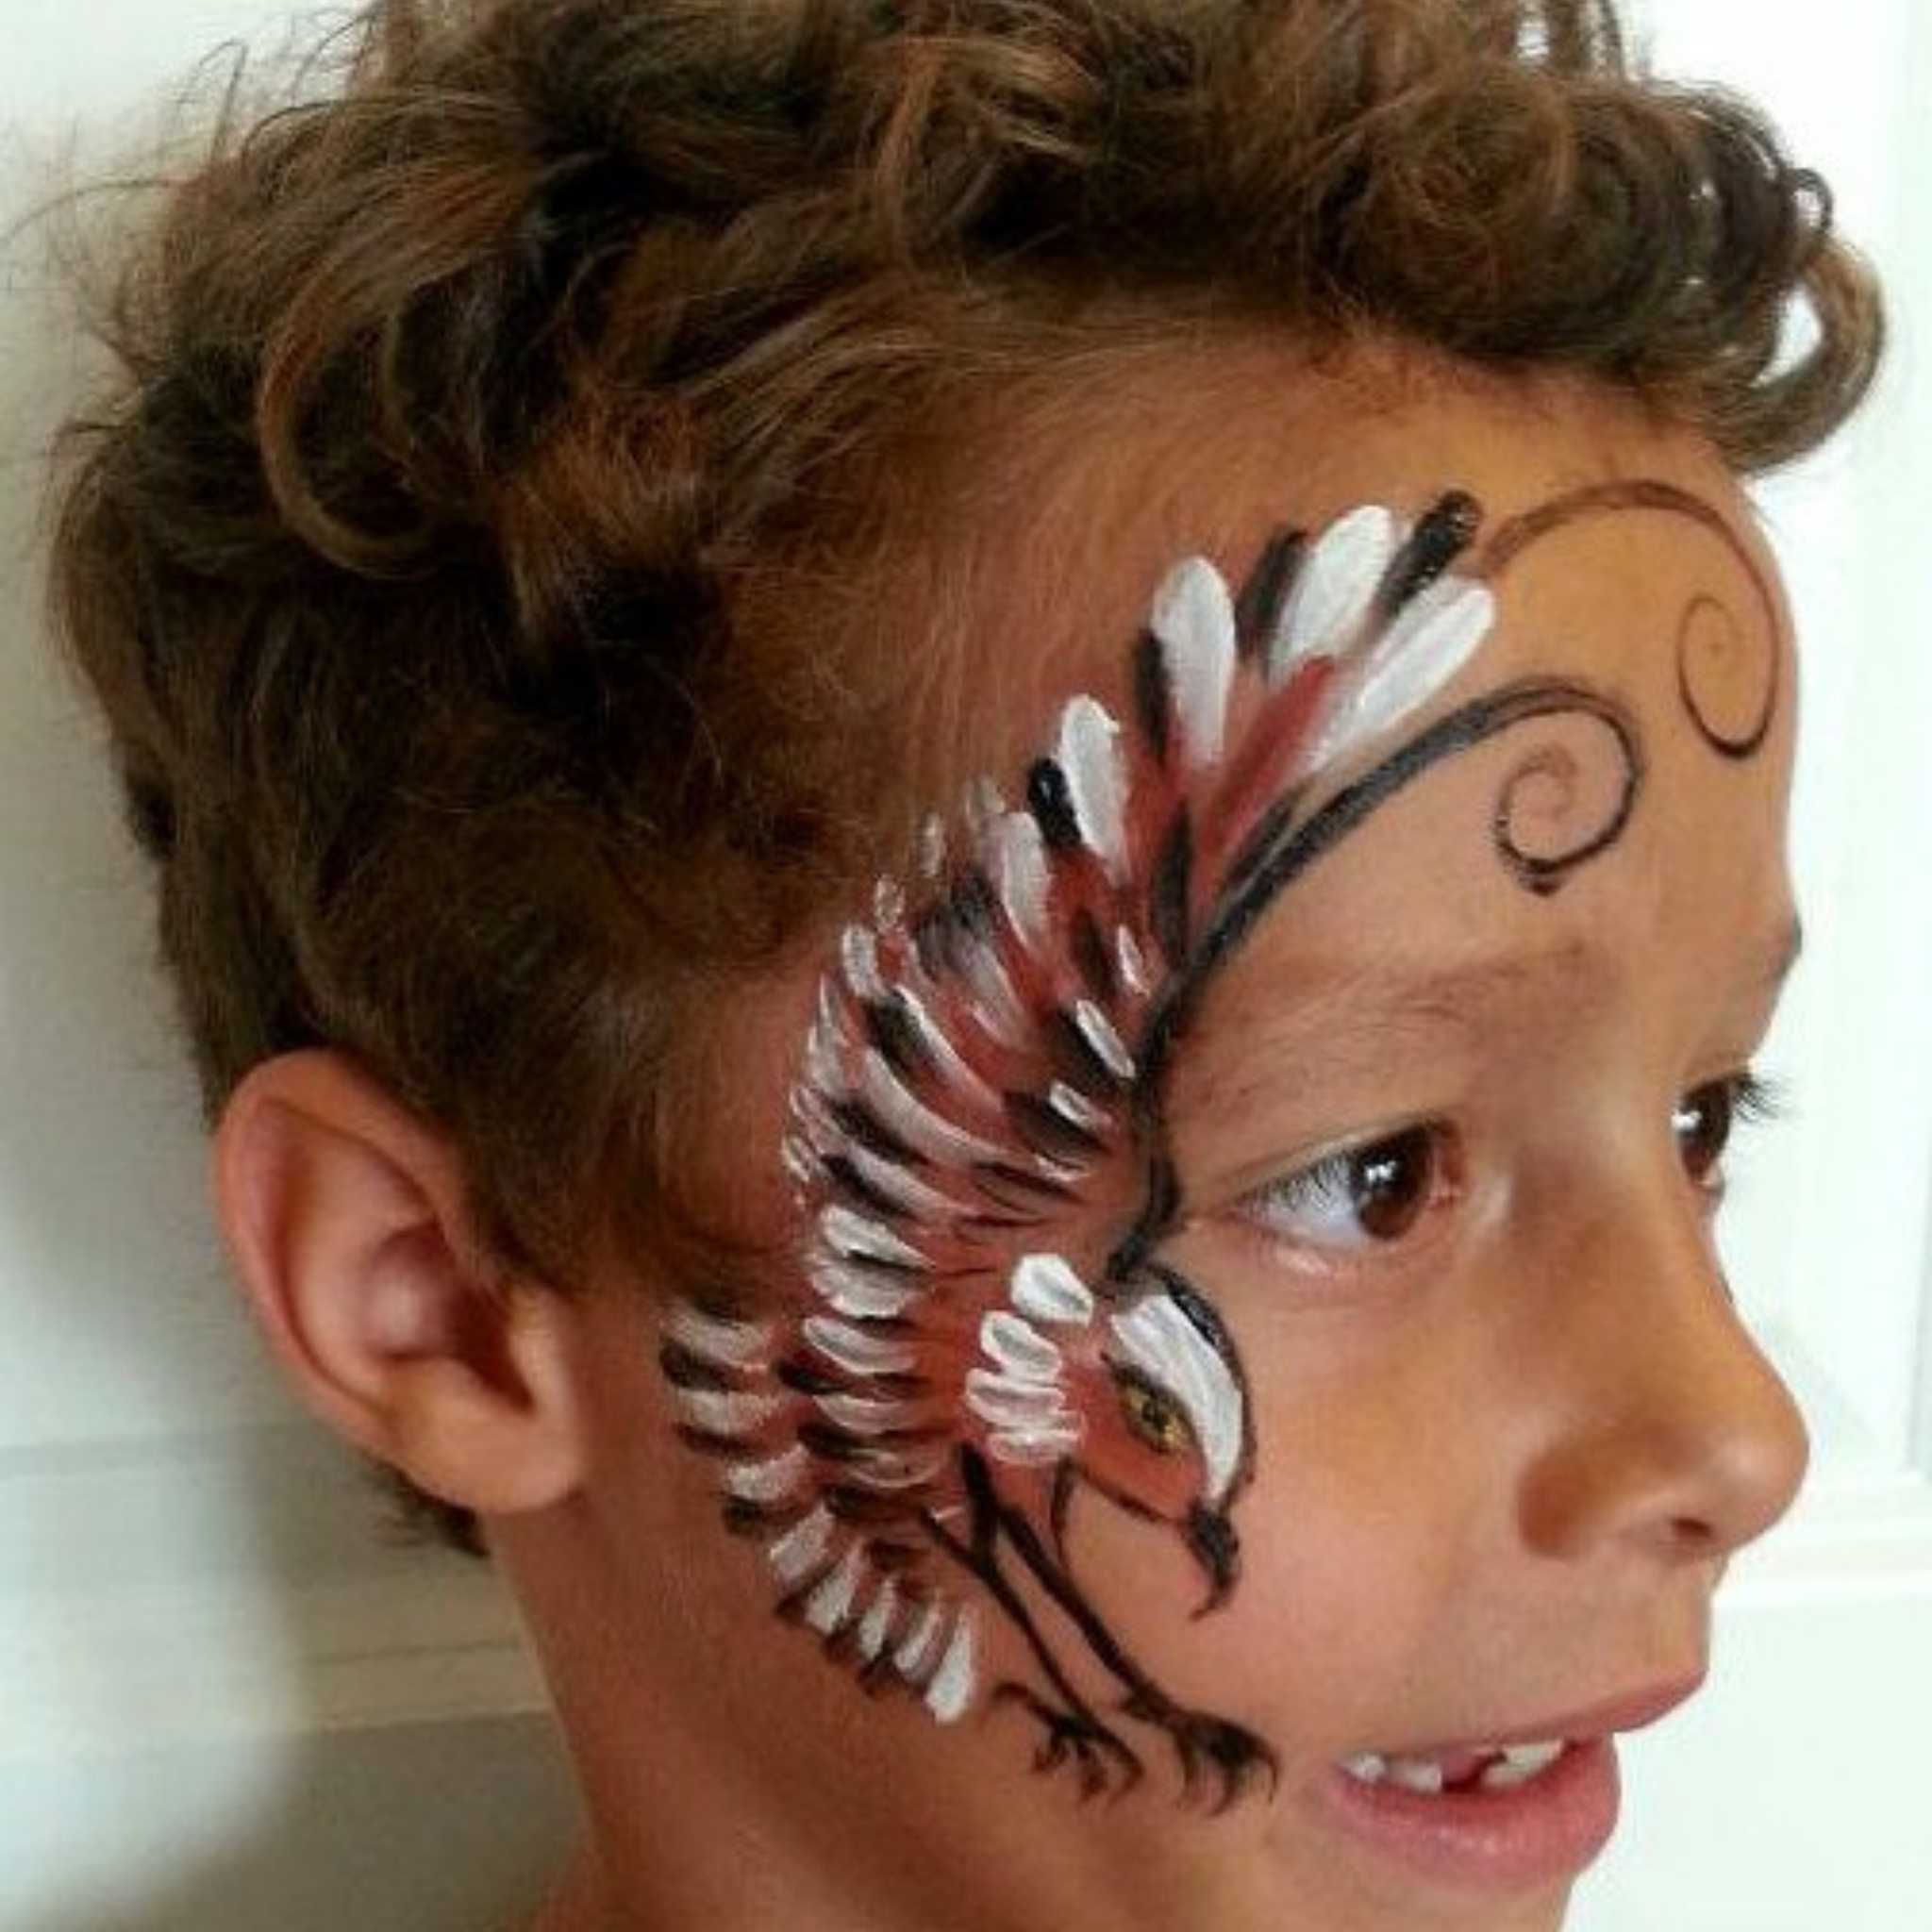 Natural Earth Natural Face Paint - 6 Pack - Showing Boys Face Painted Bird